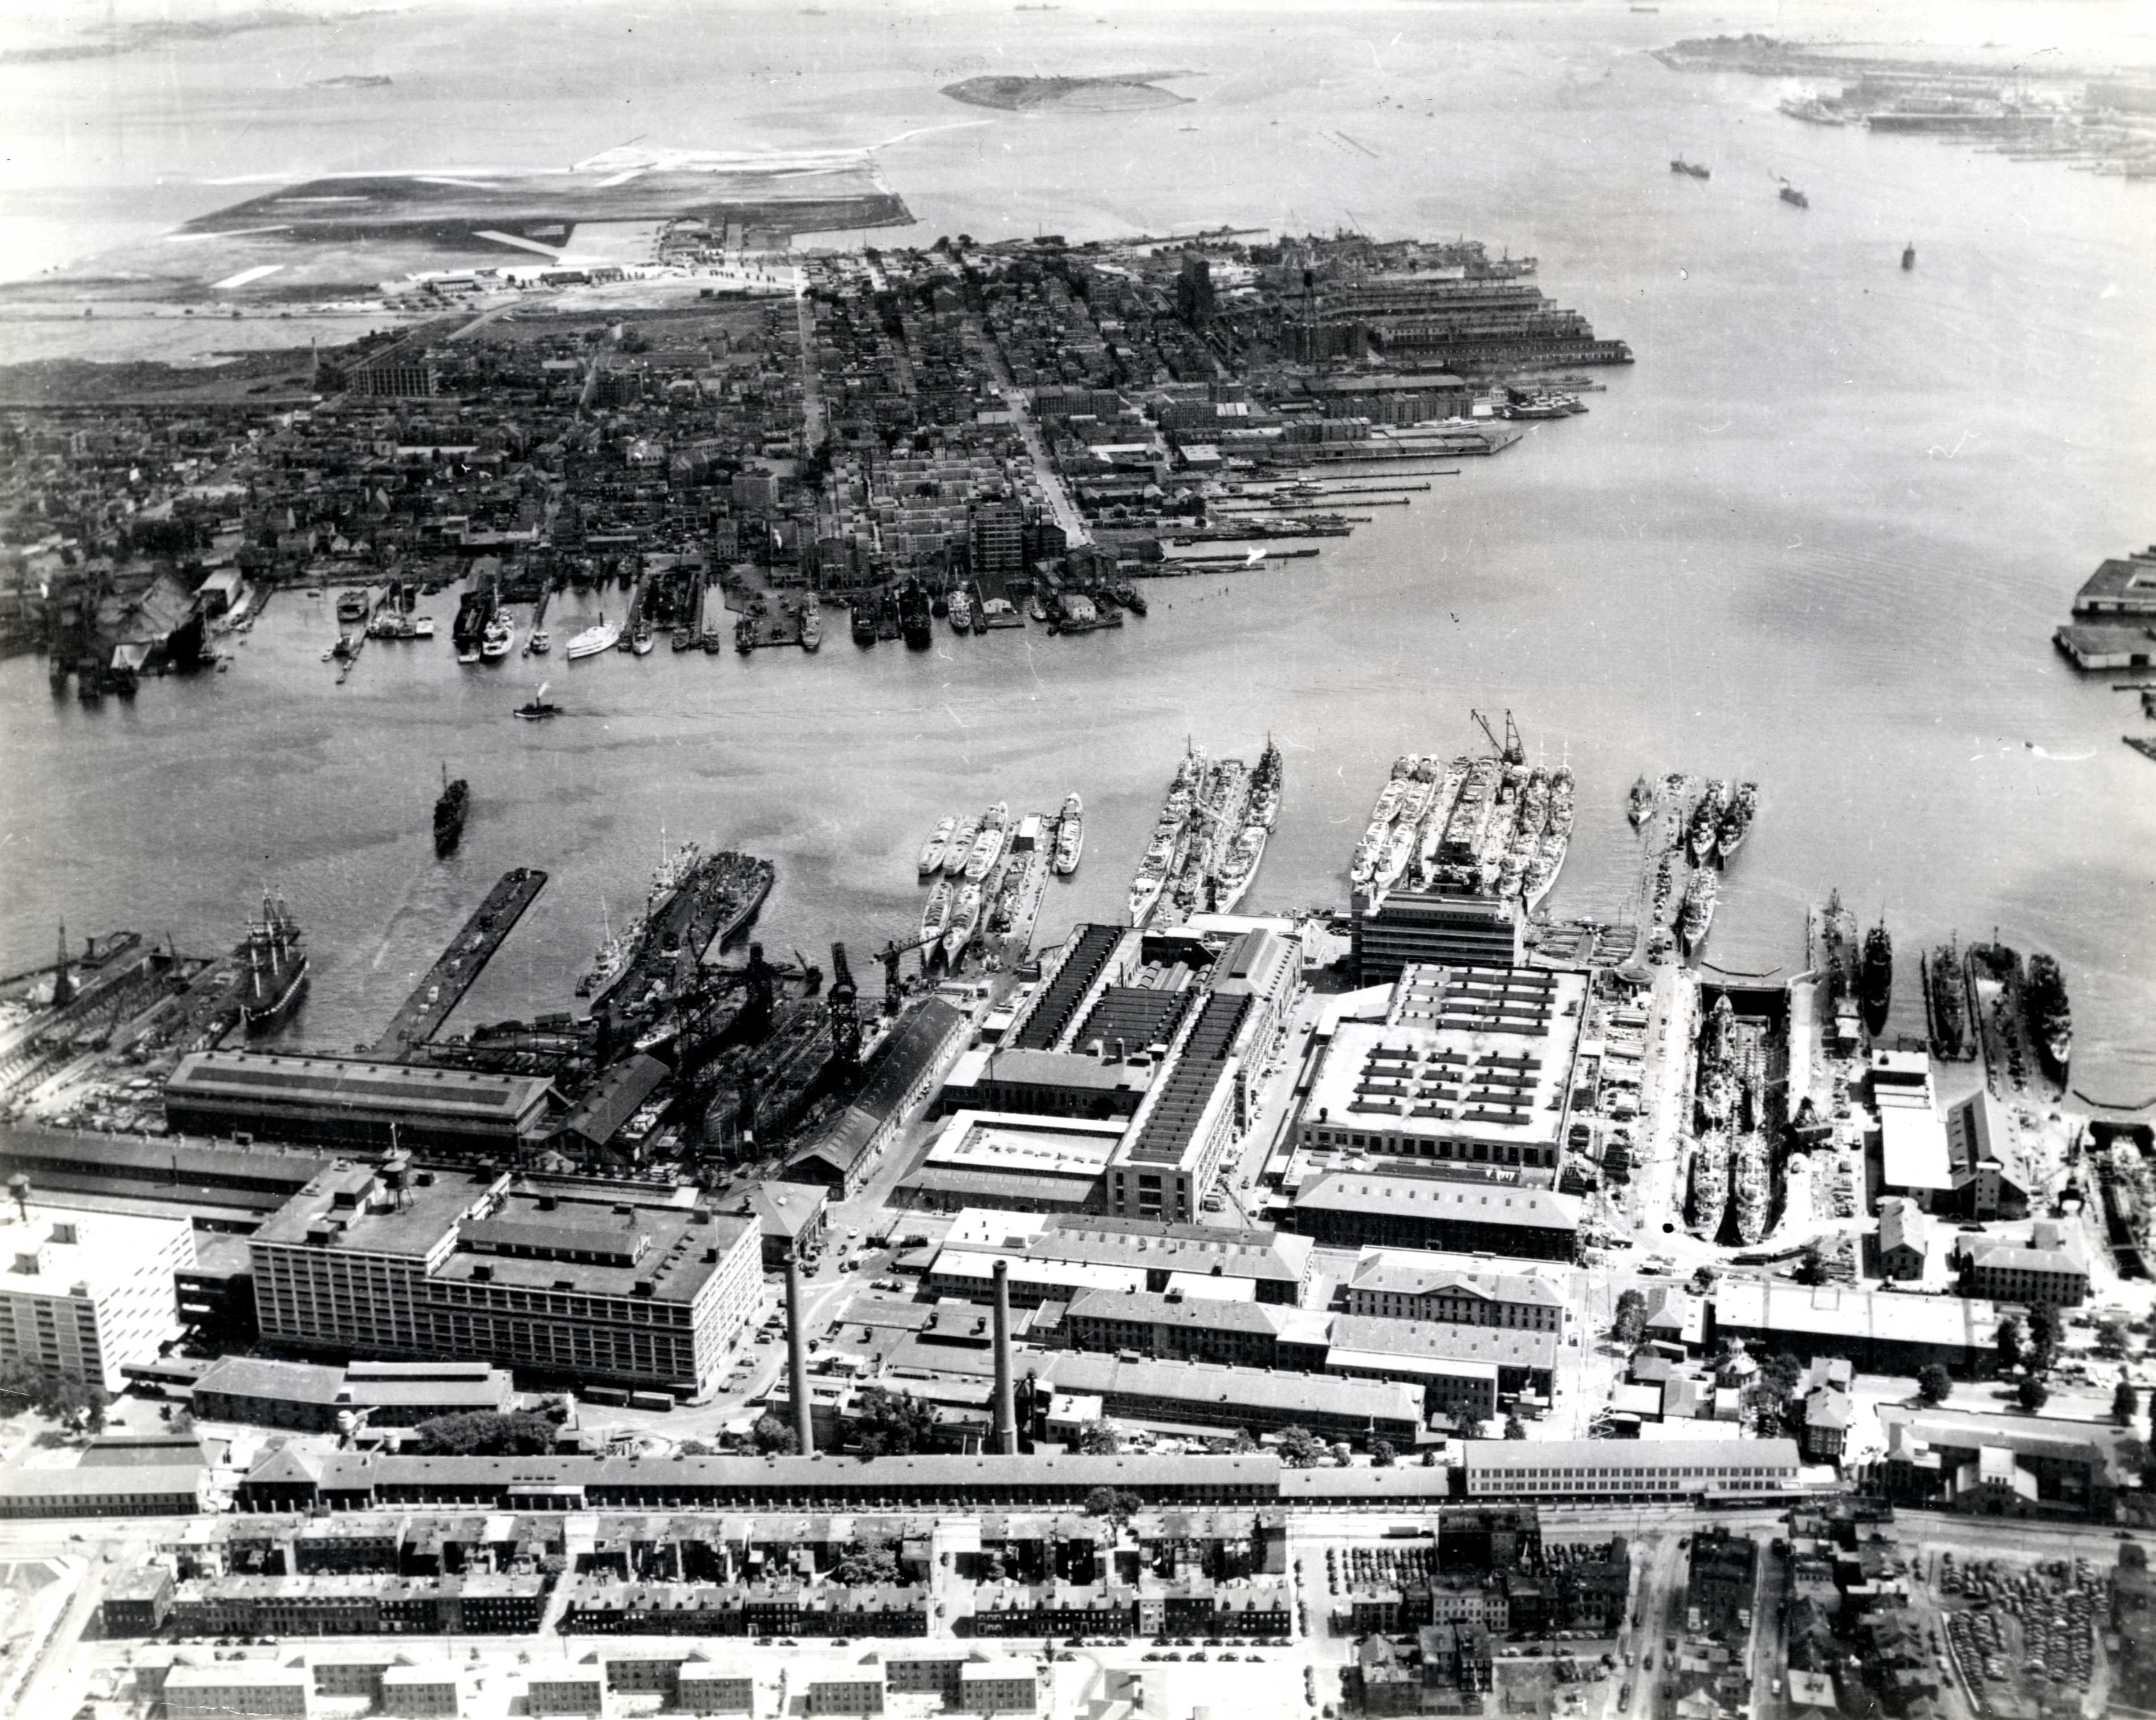 Aerial view of Boston Navy Yard, Boston, Massachusetts, United States, 1942; note frigate USS Constitution at left and Jeffrey Field (now Logan International Airport) in background